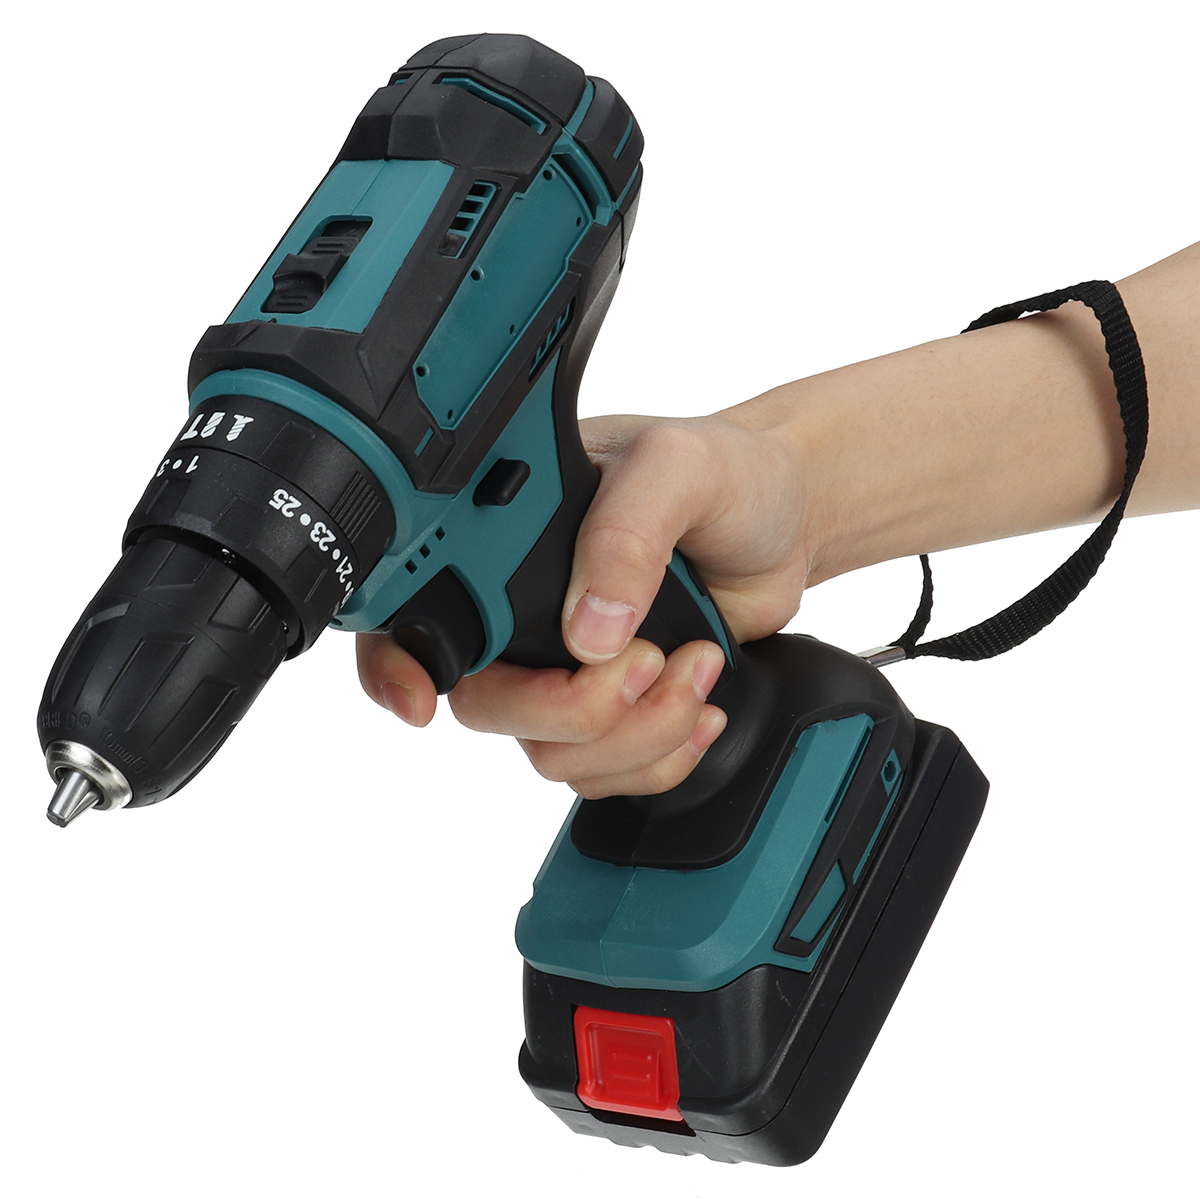 18V-Electric-Drill-Rechargeable-Screwdriver-Flat-Drill-Impact-Wrench-w-None-or-1pc-or-2pcs-Battery-1798111-8